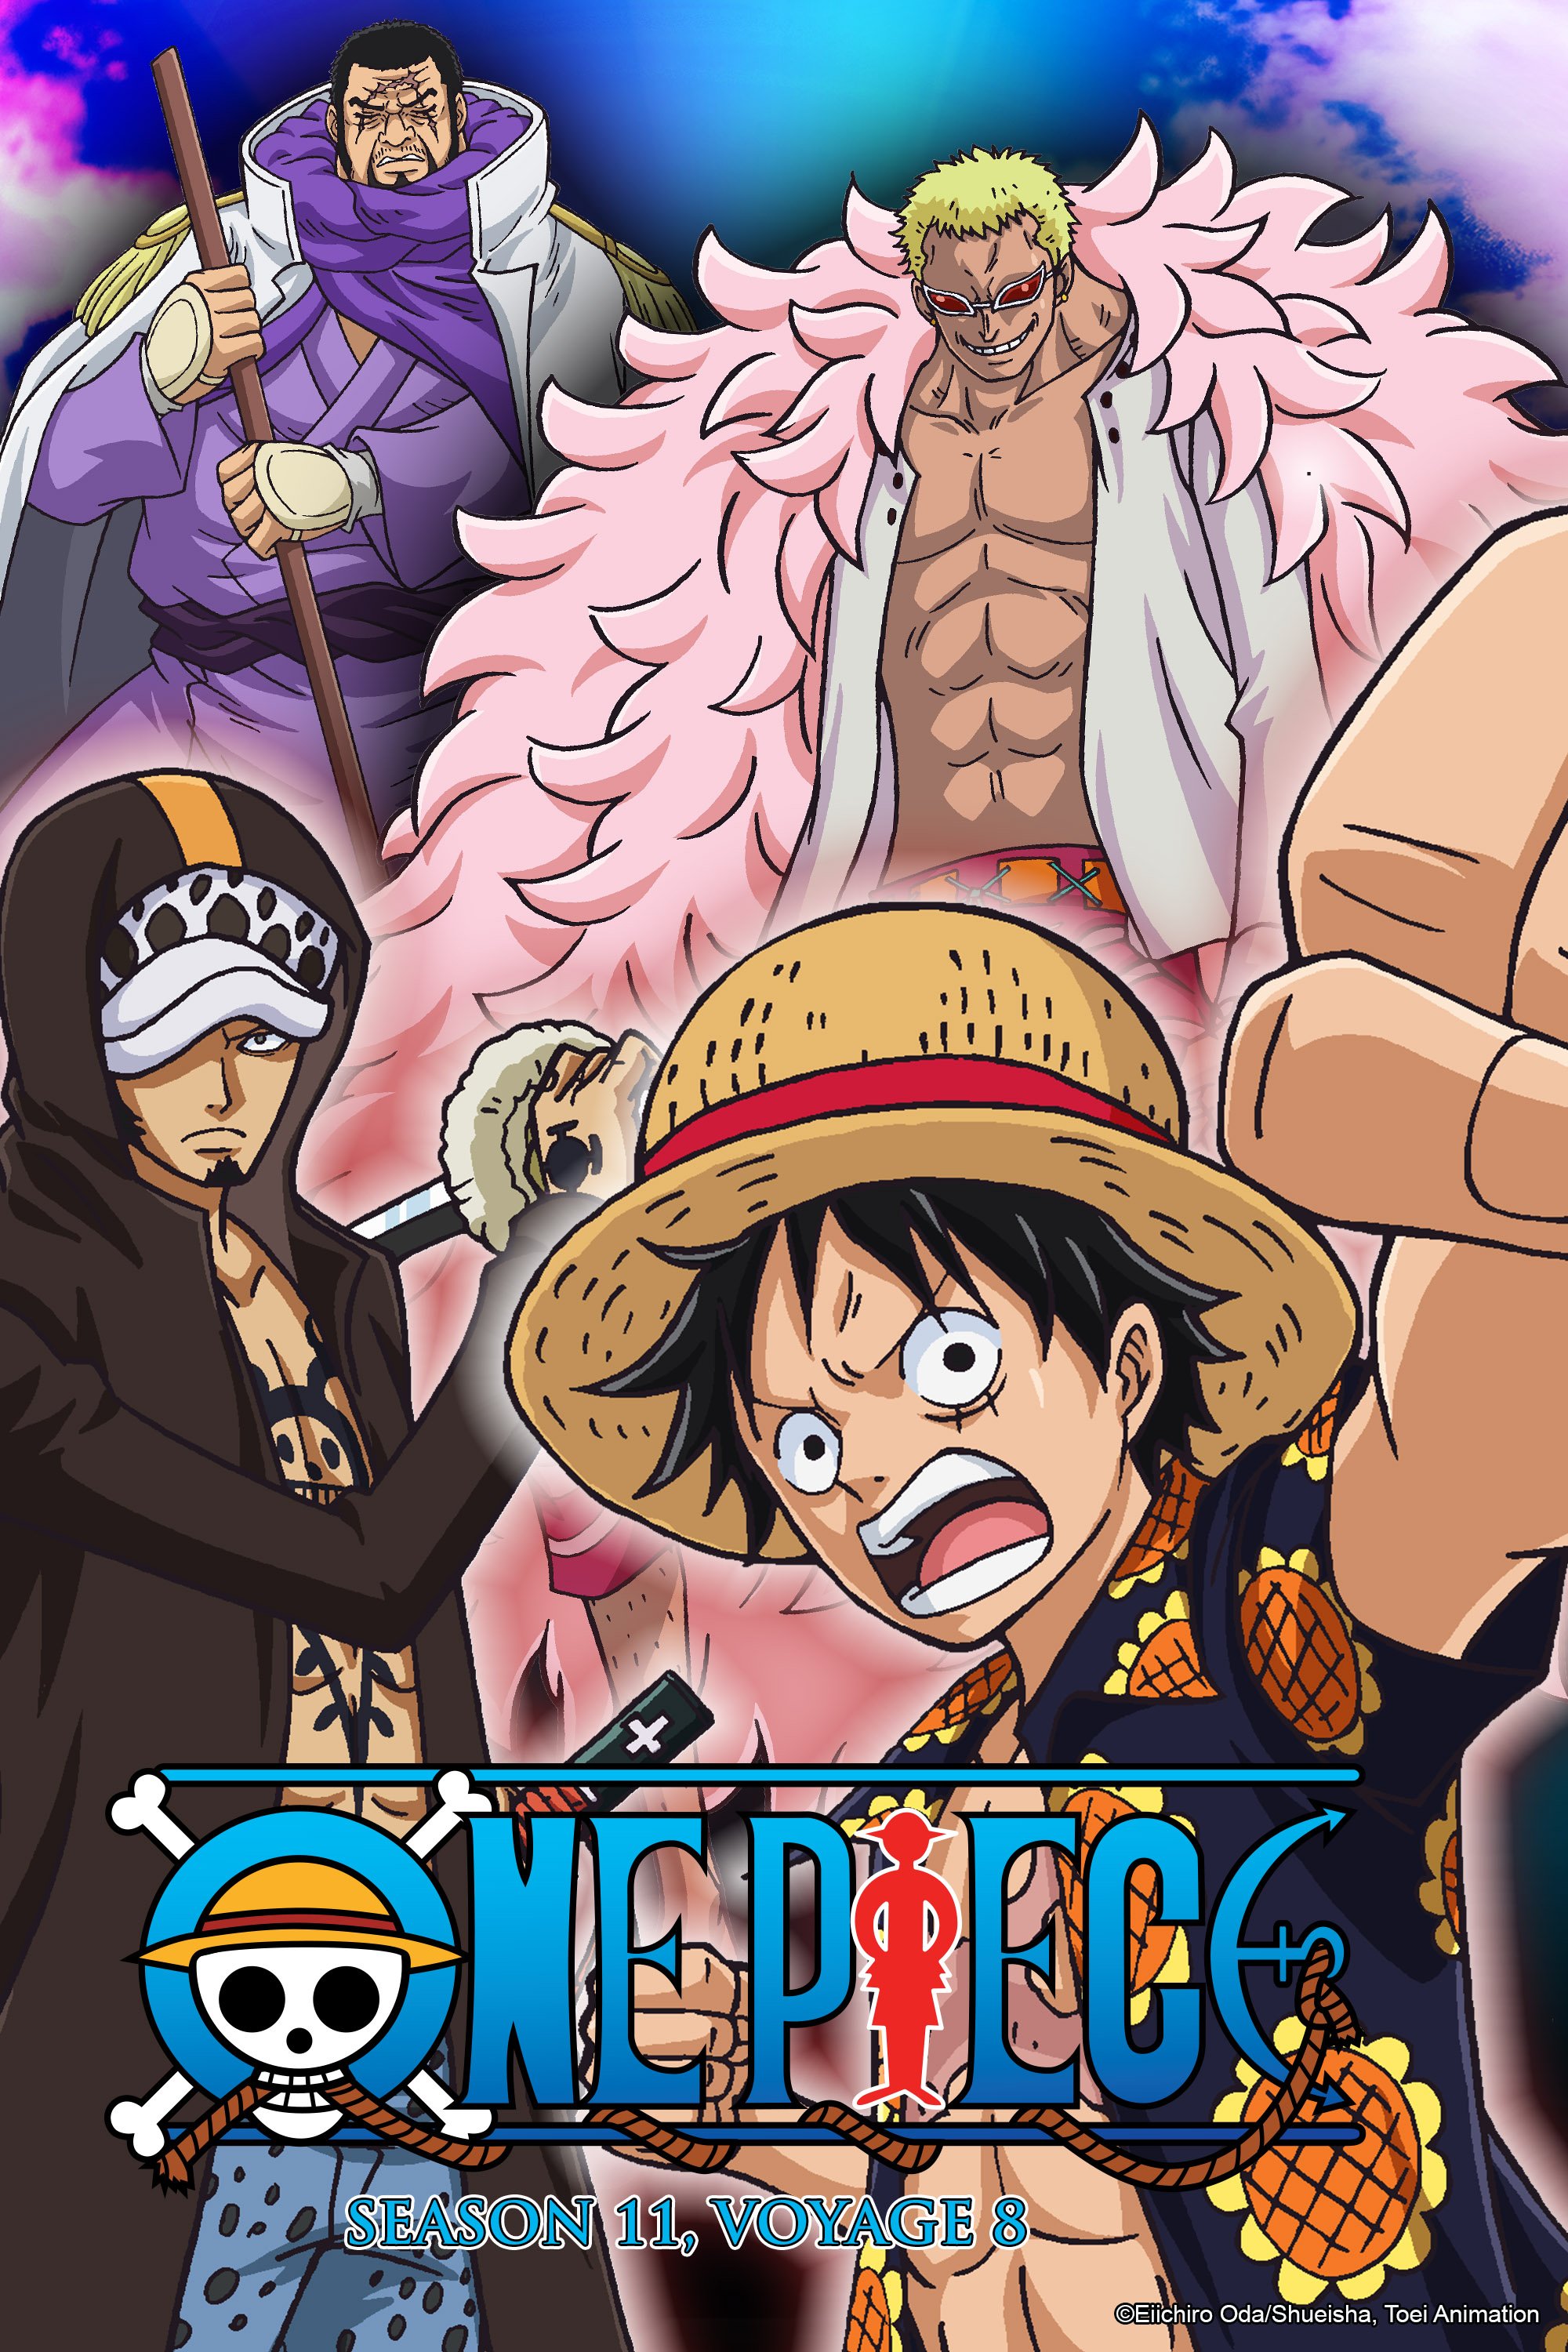 One Piece The Clash Between Luffy And Doflamingo Has Finally Begun Meanwhile The Birdcage Closes In On Dressrosa What Will Happen To Our Straw Hats One Piece Season 11 Voyage